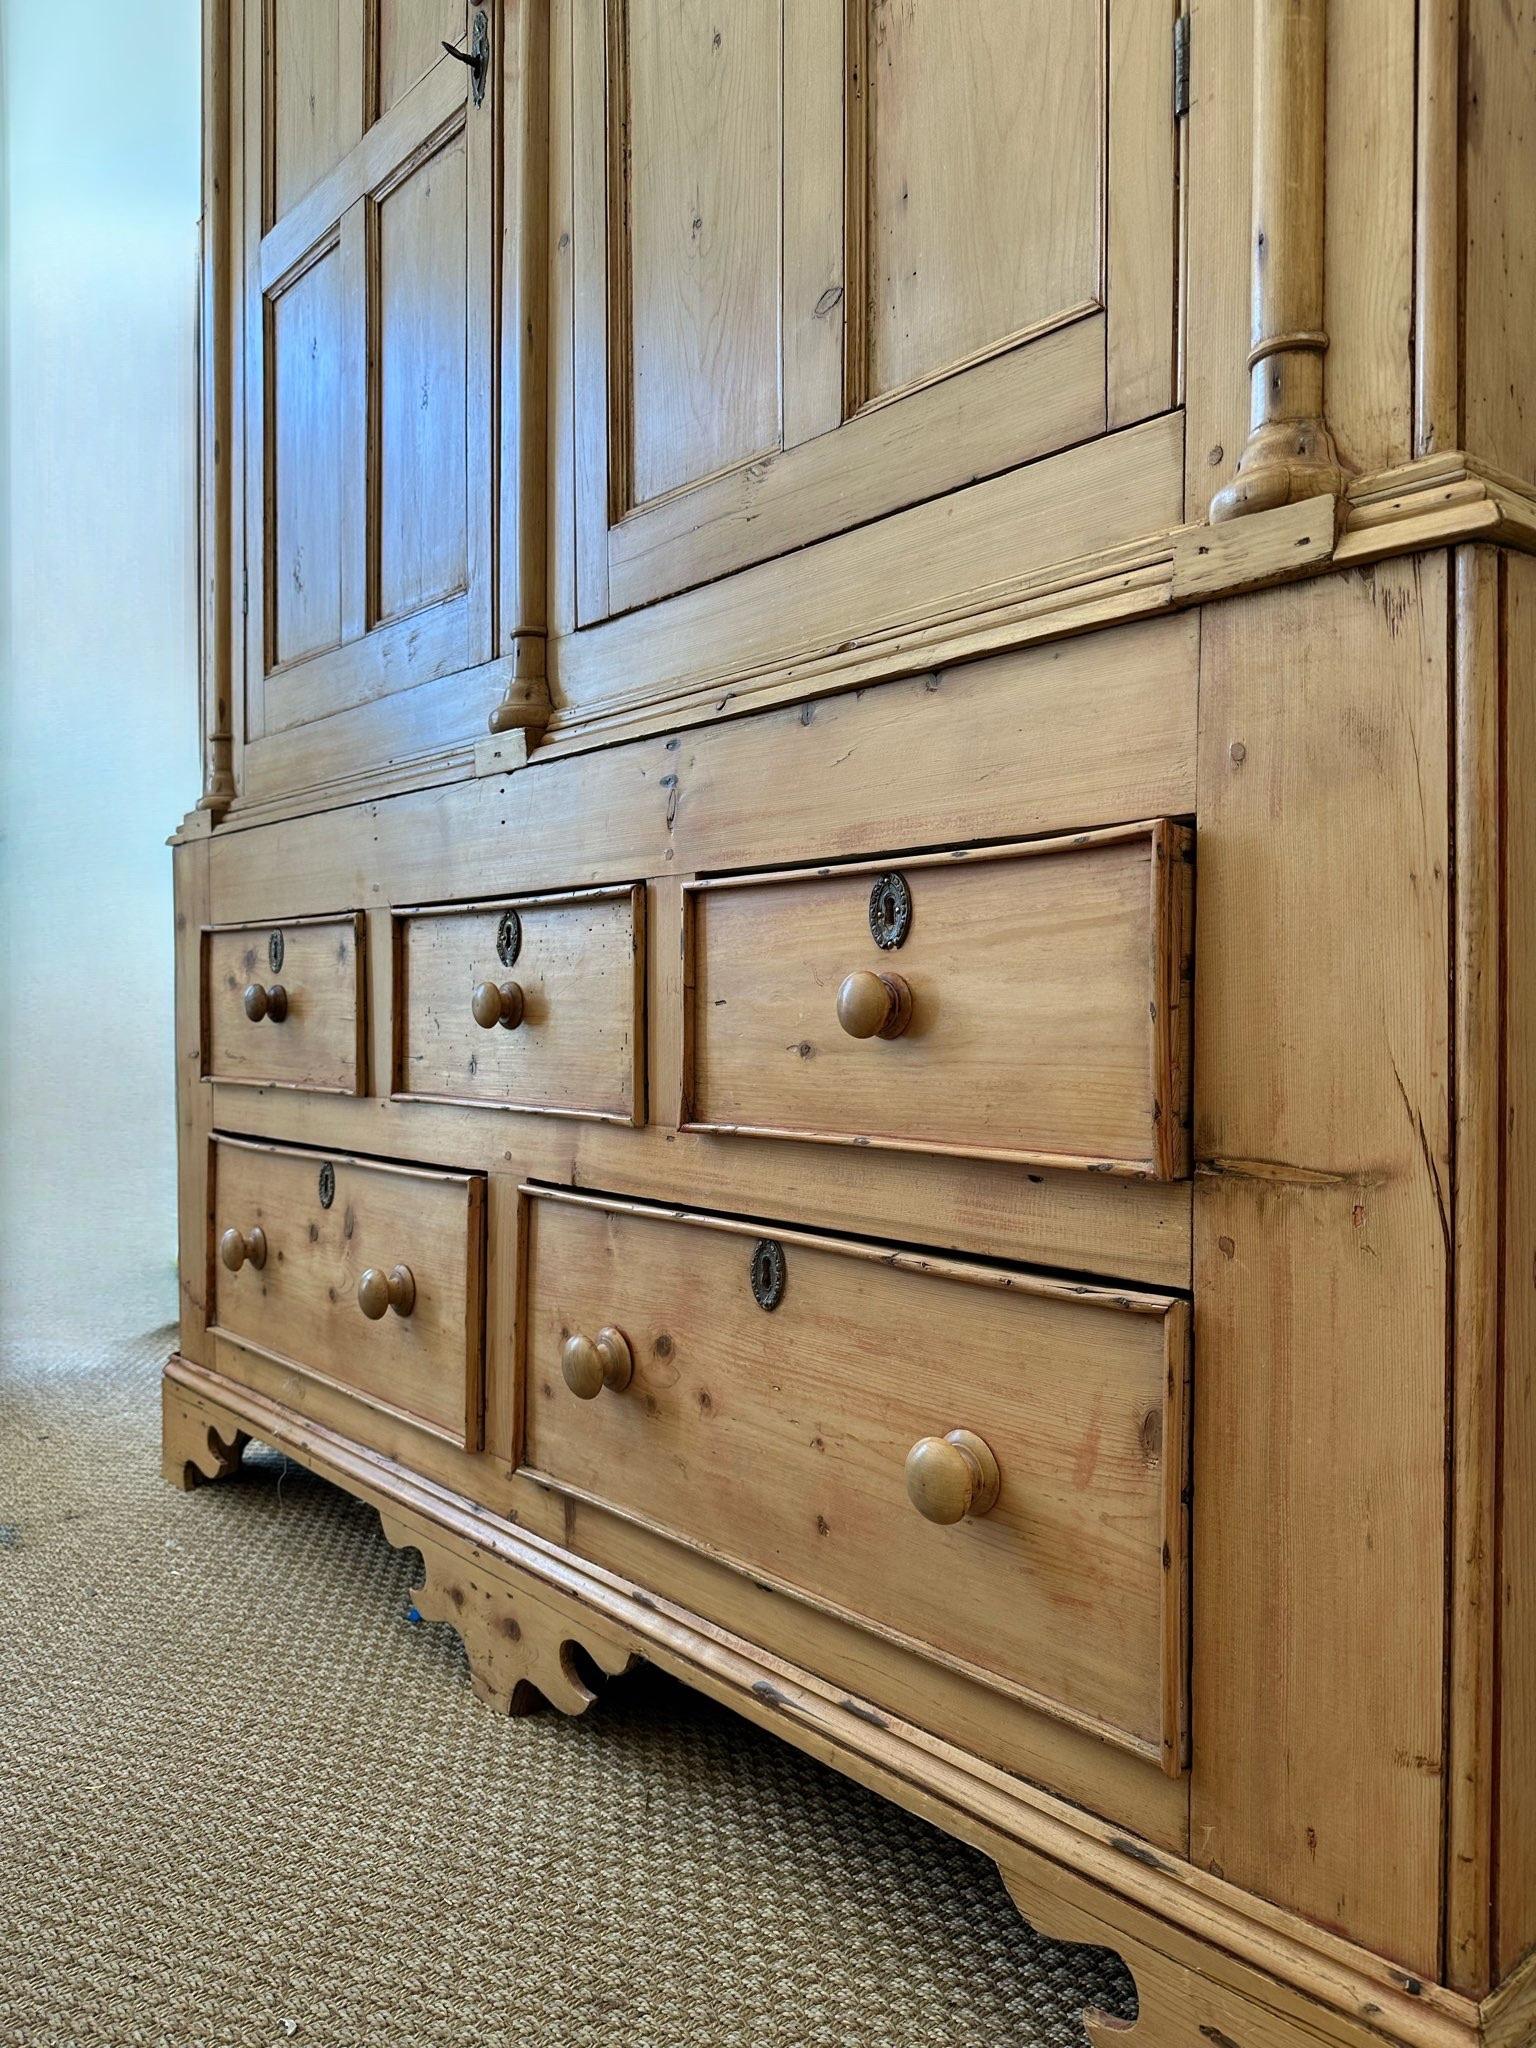 19th Century Irish Linen Press. Made of Pine with wonderful Architectural Details. Carved and moulded Cornice with three Columns Separating two Paneled Doors over base with Five original Drawers above the original decorative Bracket Feet. Great